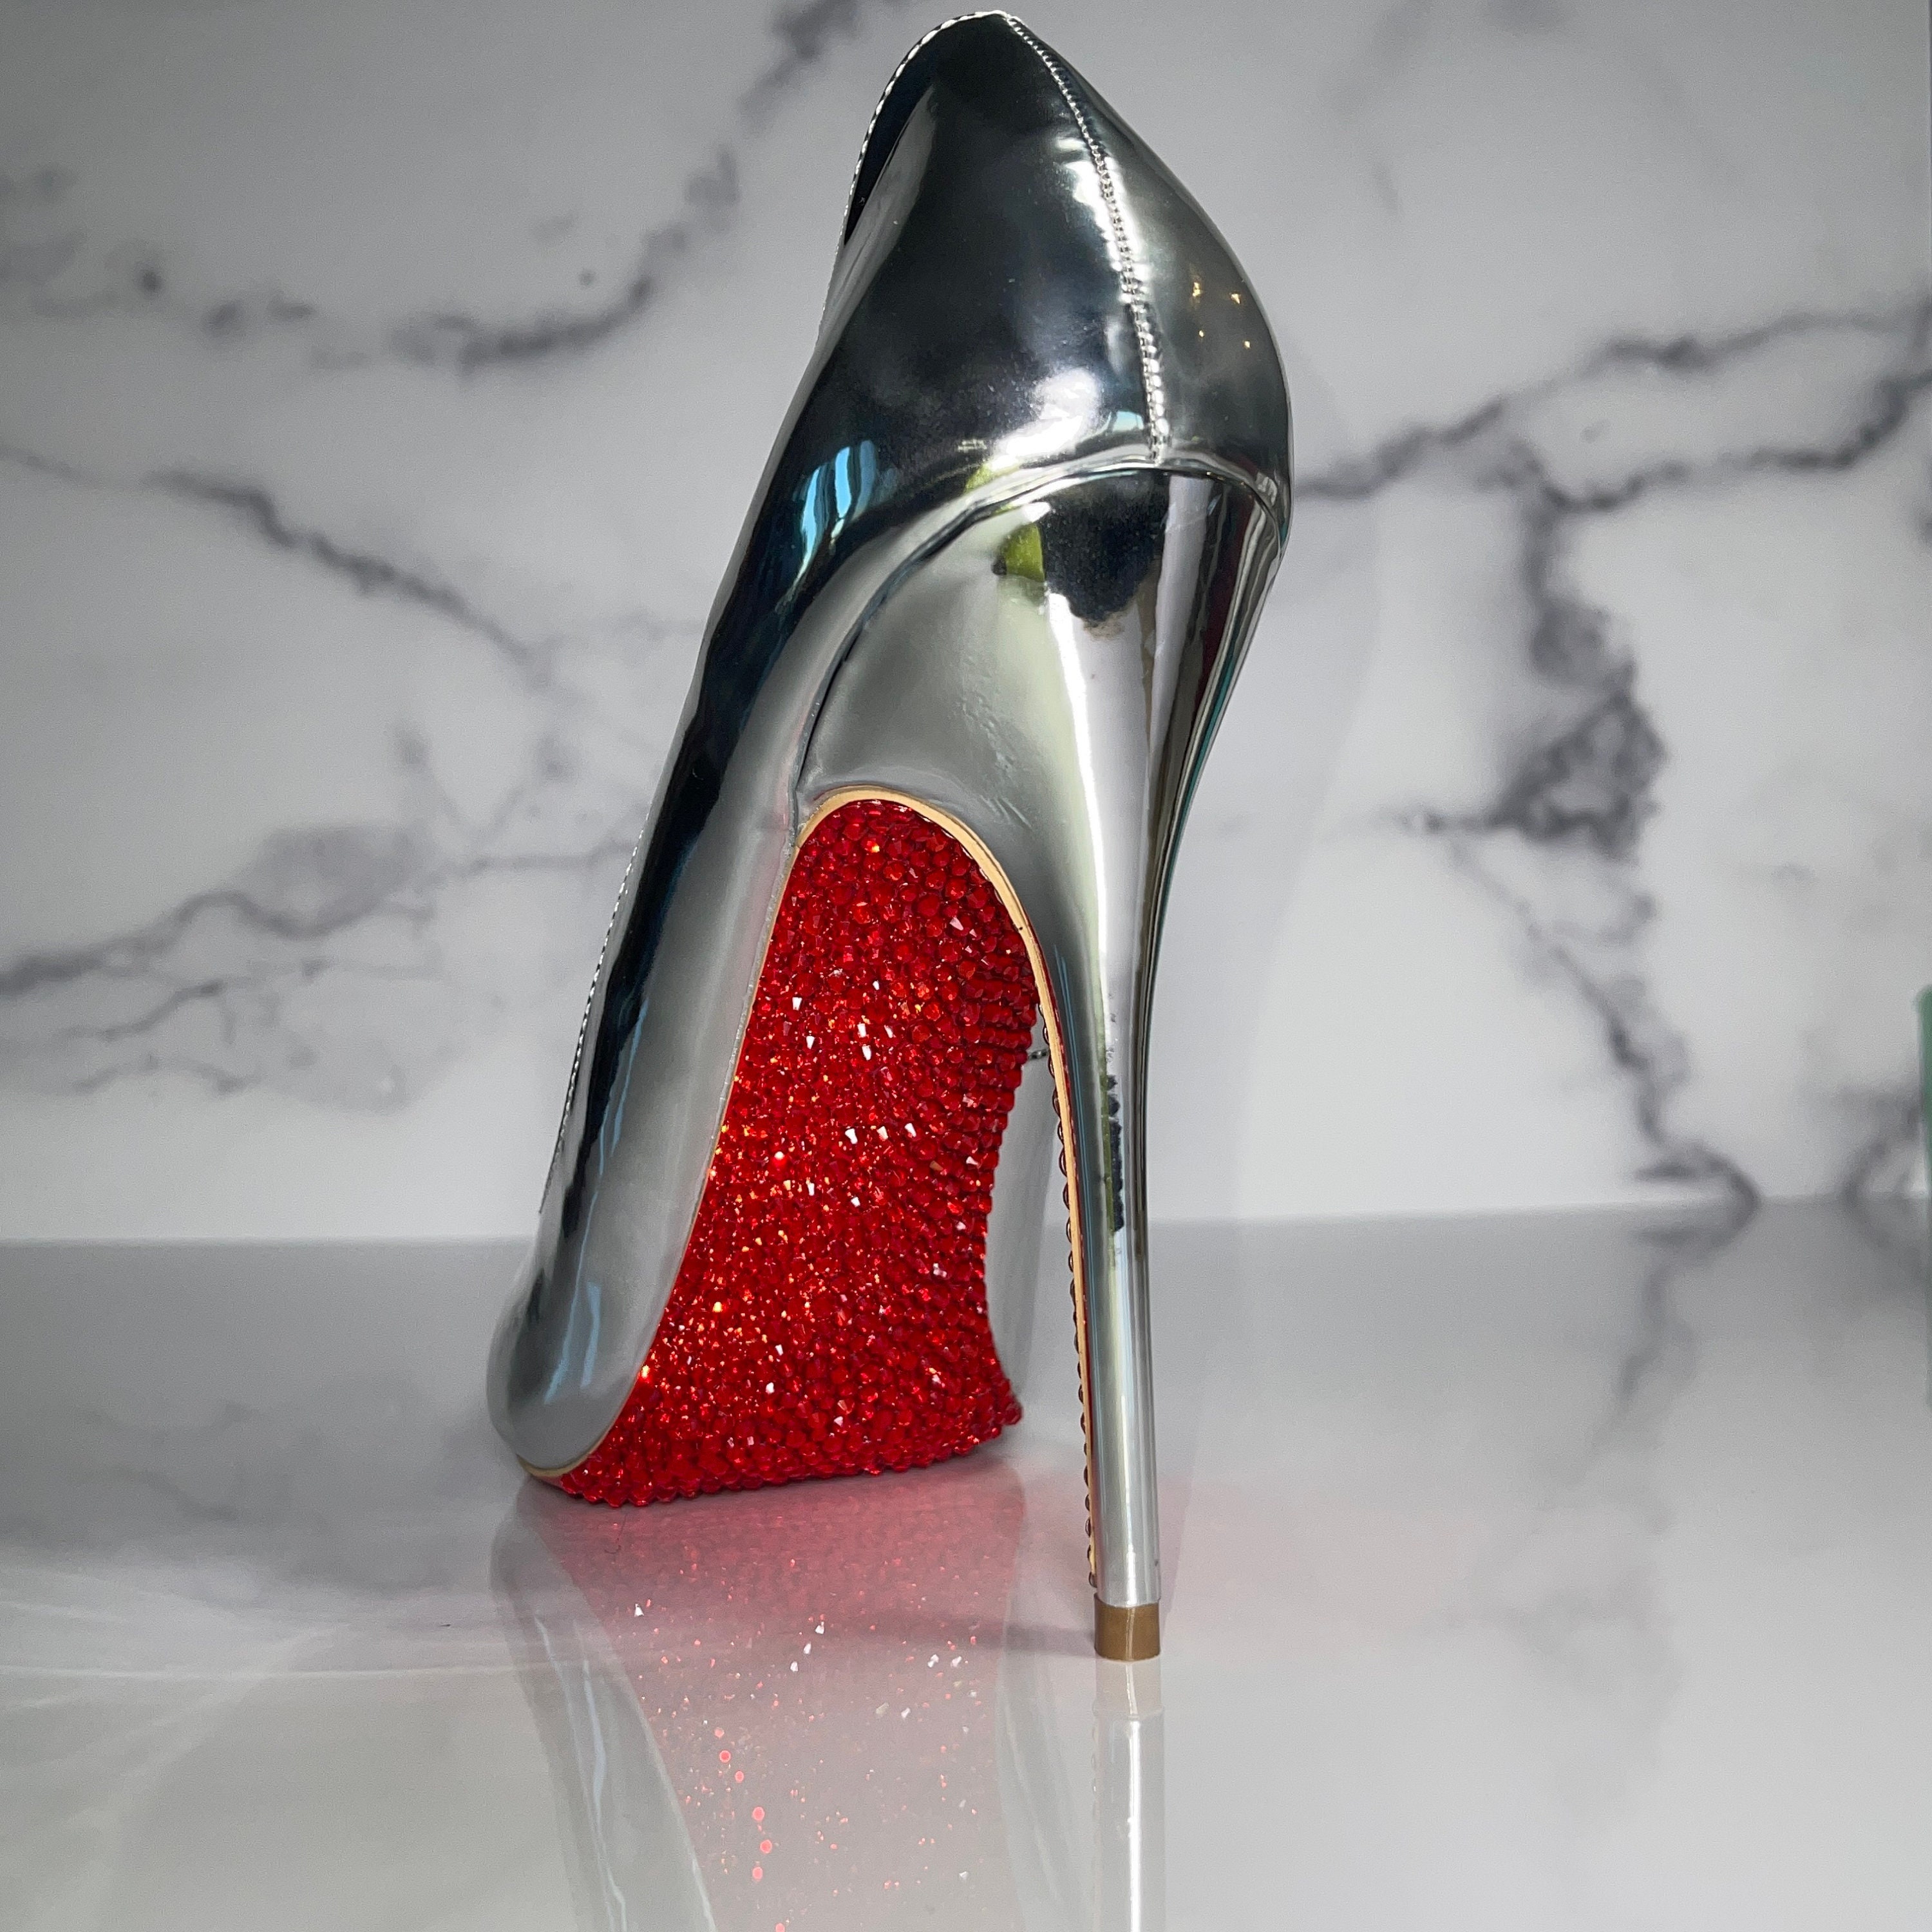 crystal bridal shoes – Christian Louboutin Strass & Crystal shoes